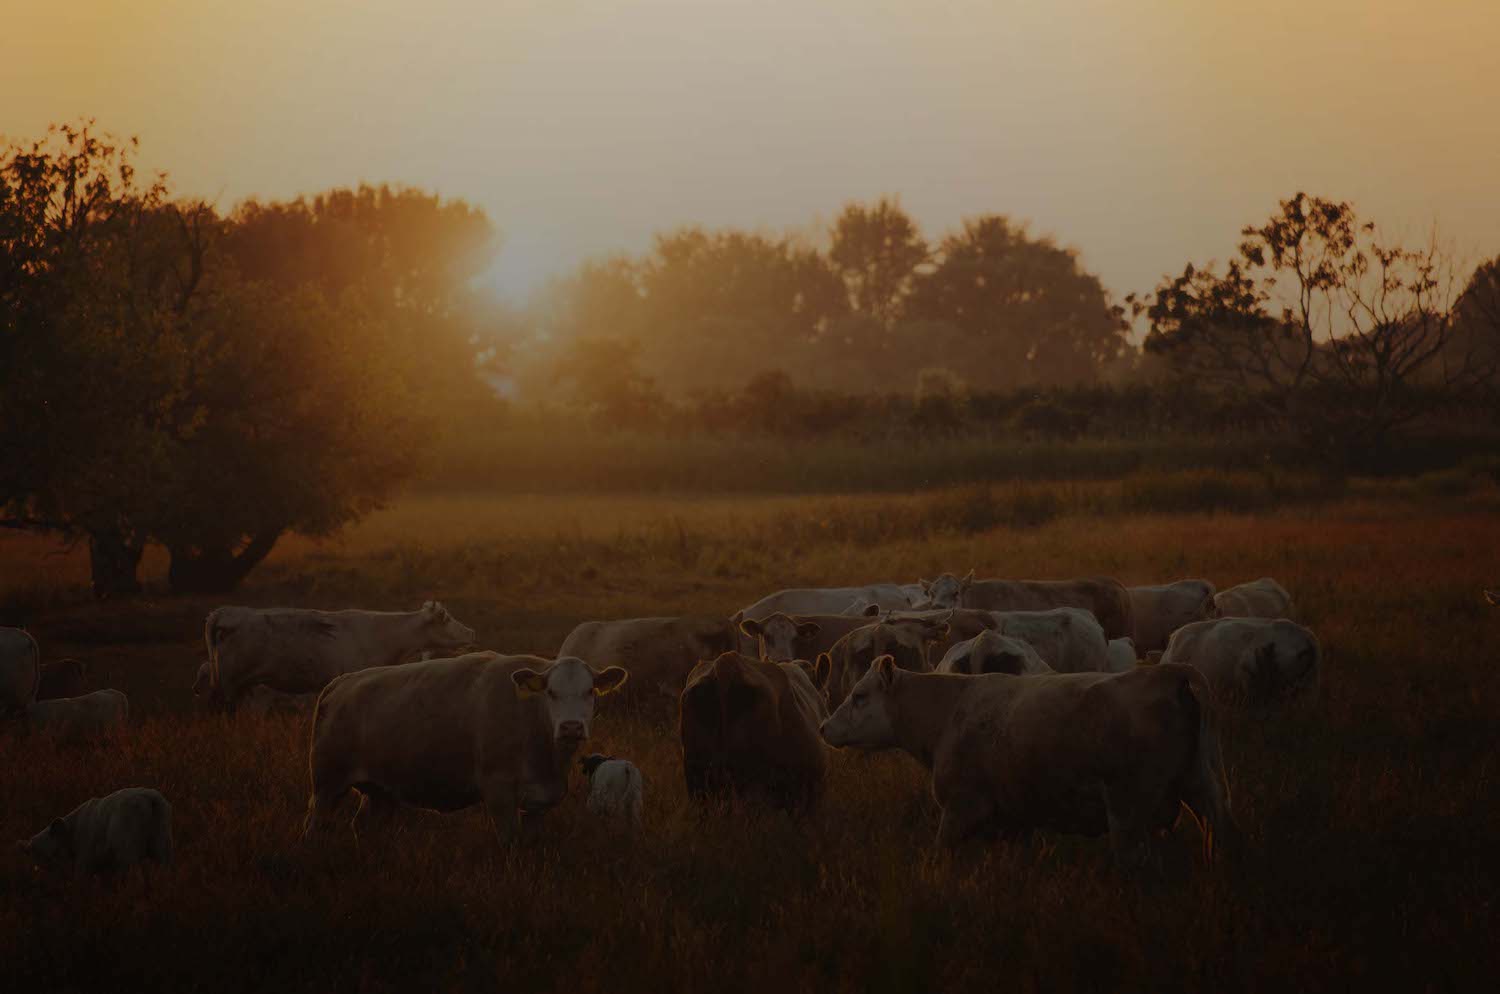 A herd of cows grazes in a grassy field at sunset. The sun is setting behind trees in the distance, casting a warm golden glow over the scene. The landscape appears calm and serene.